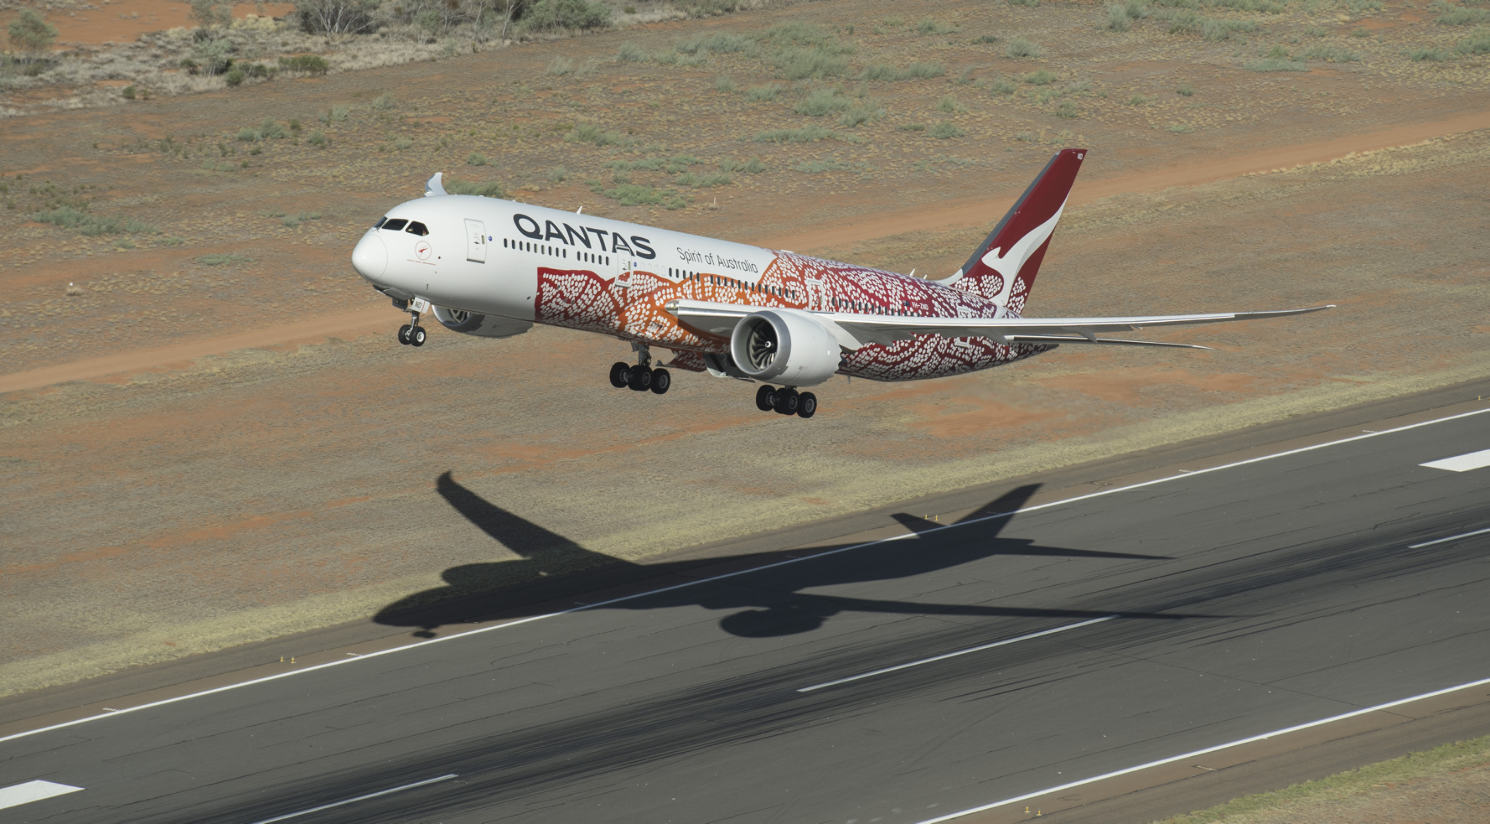 Qantas completes first direct flight from Australia to Europe